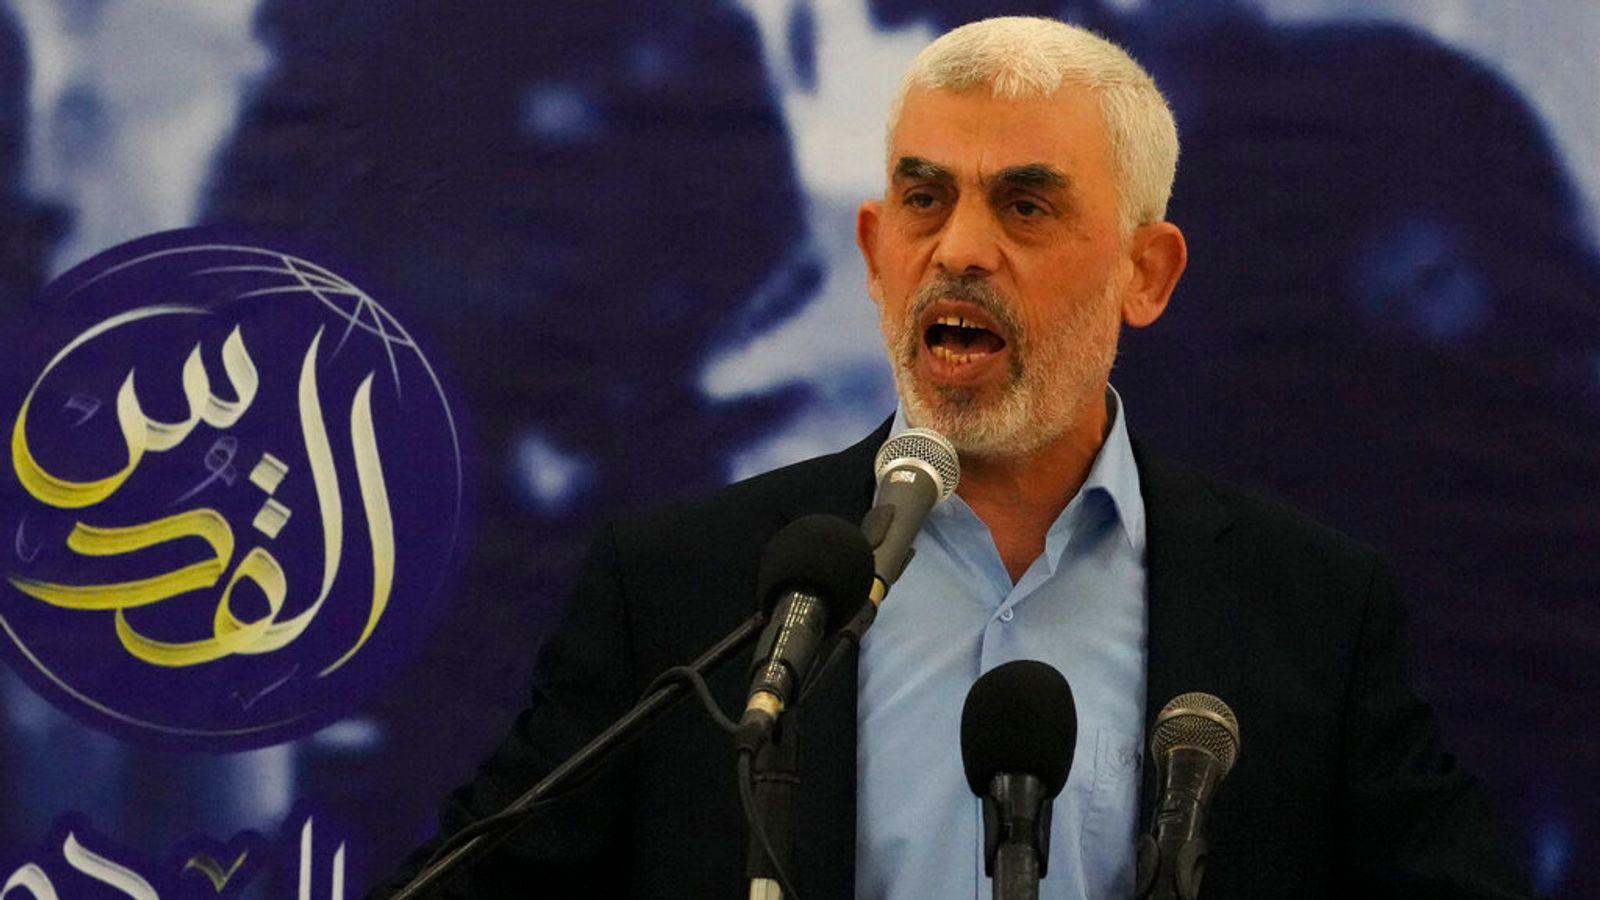 Who is Hamas leader Yahya Sinwar – the ‘butcher of Khan Younis’ Israel claims to have trapped in a bunker?